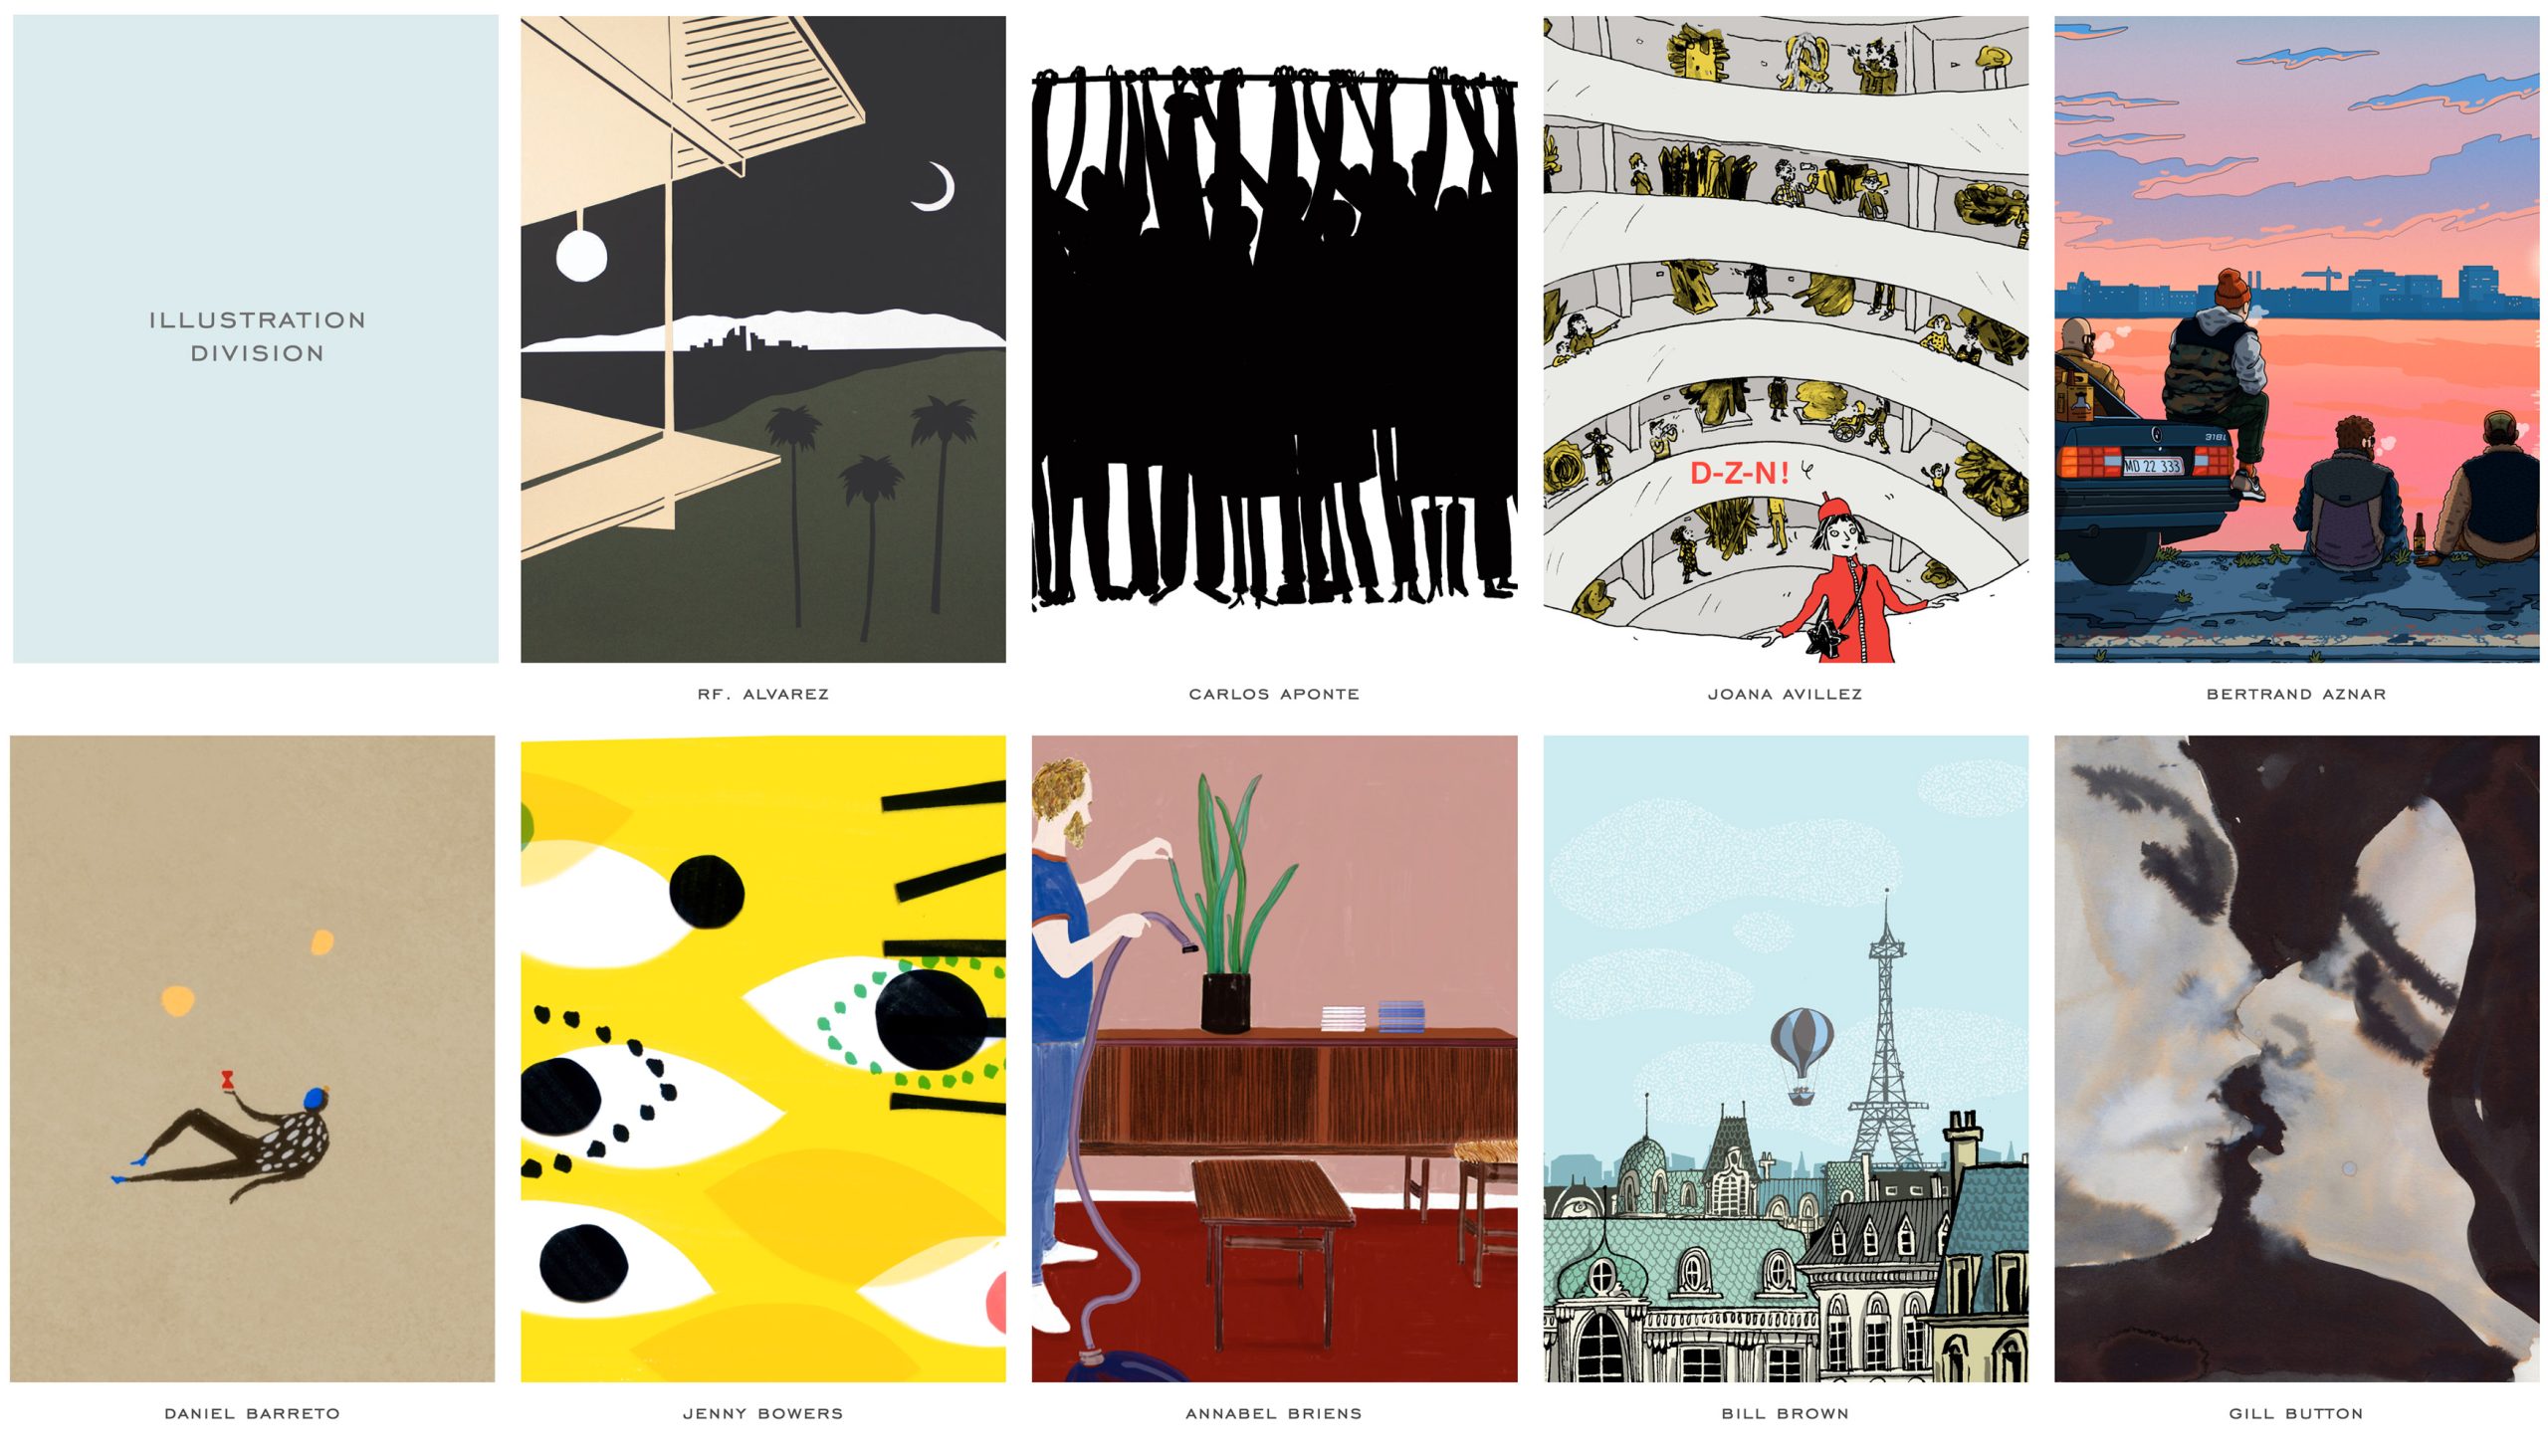 Division is an illustration agency in GB